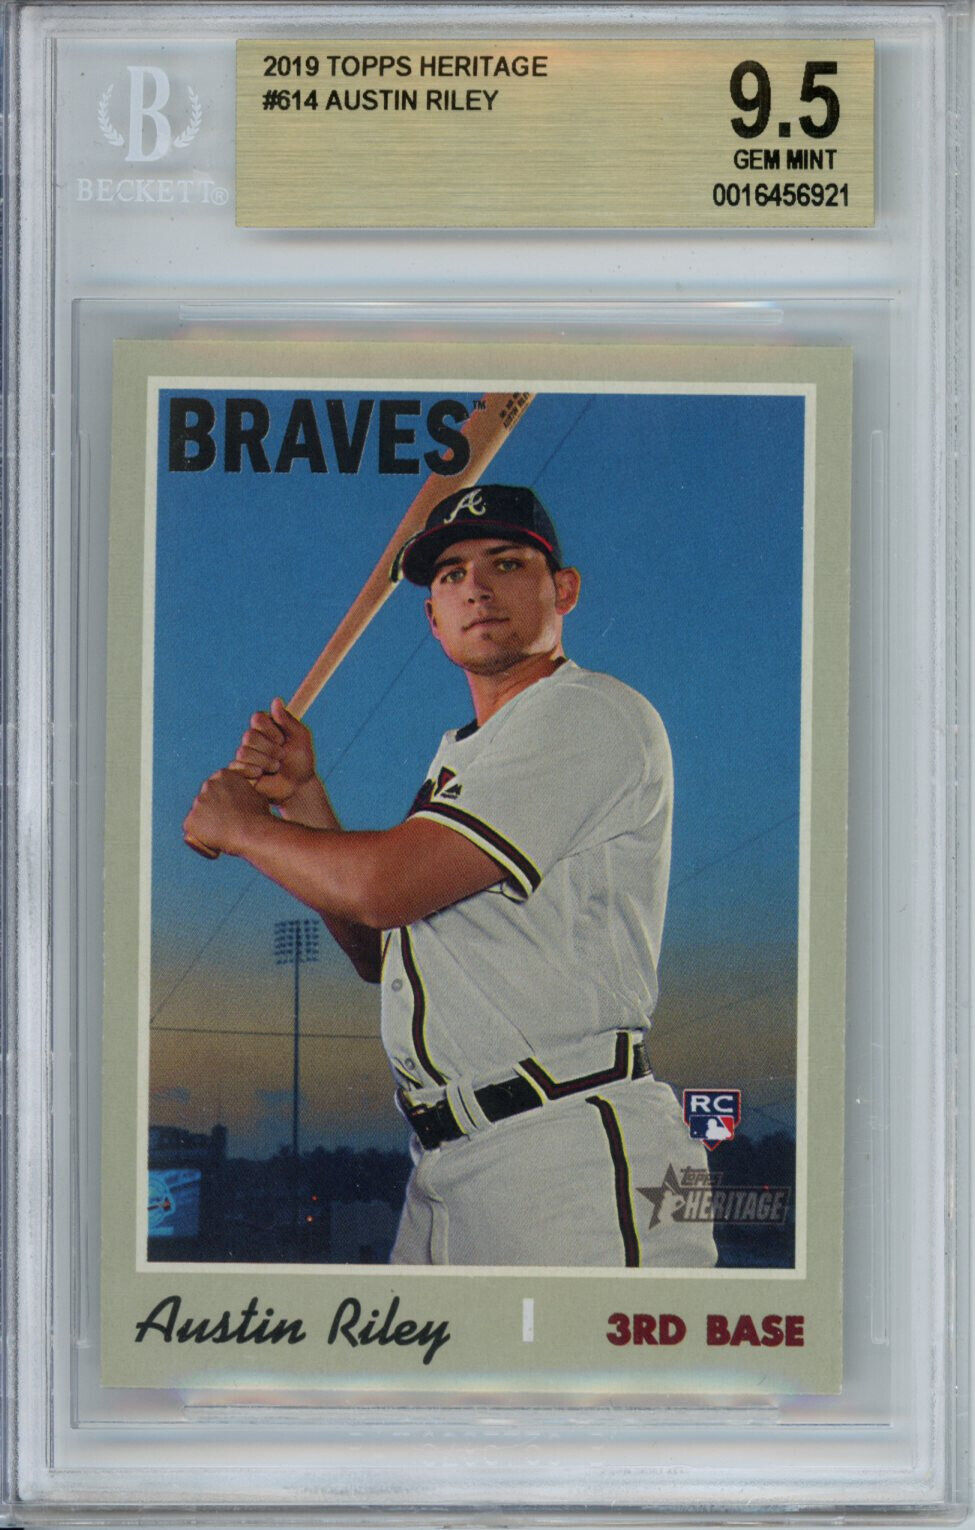 2019 Topps Heritage High Number Austin Riley Rookie Card #614 BGS 9.5 Gem Mt RC